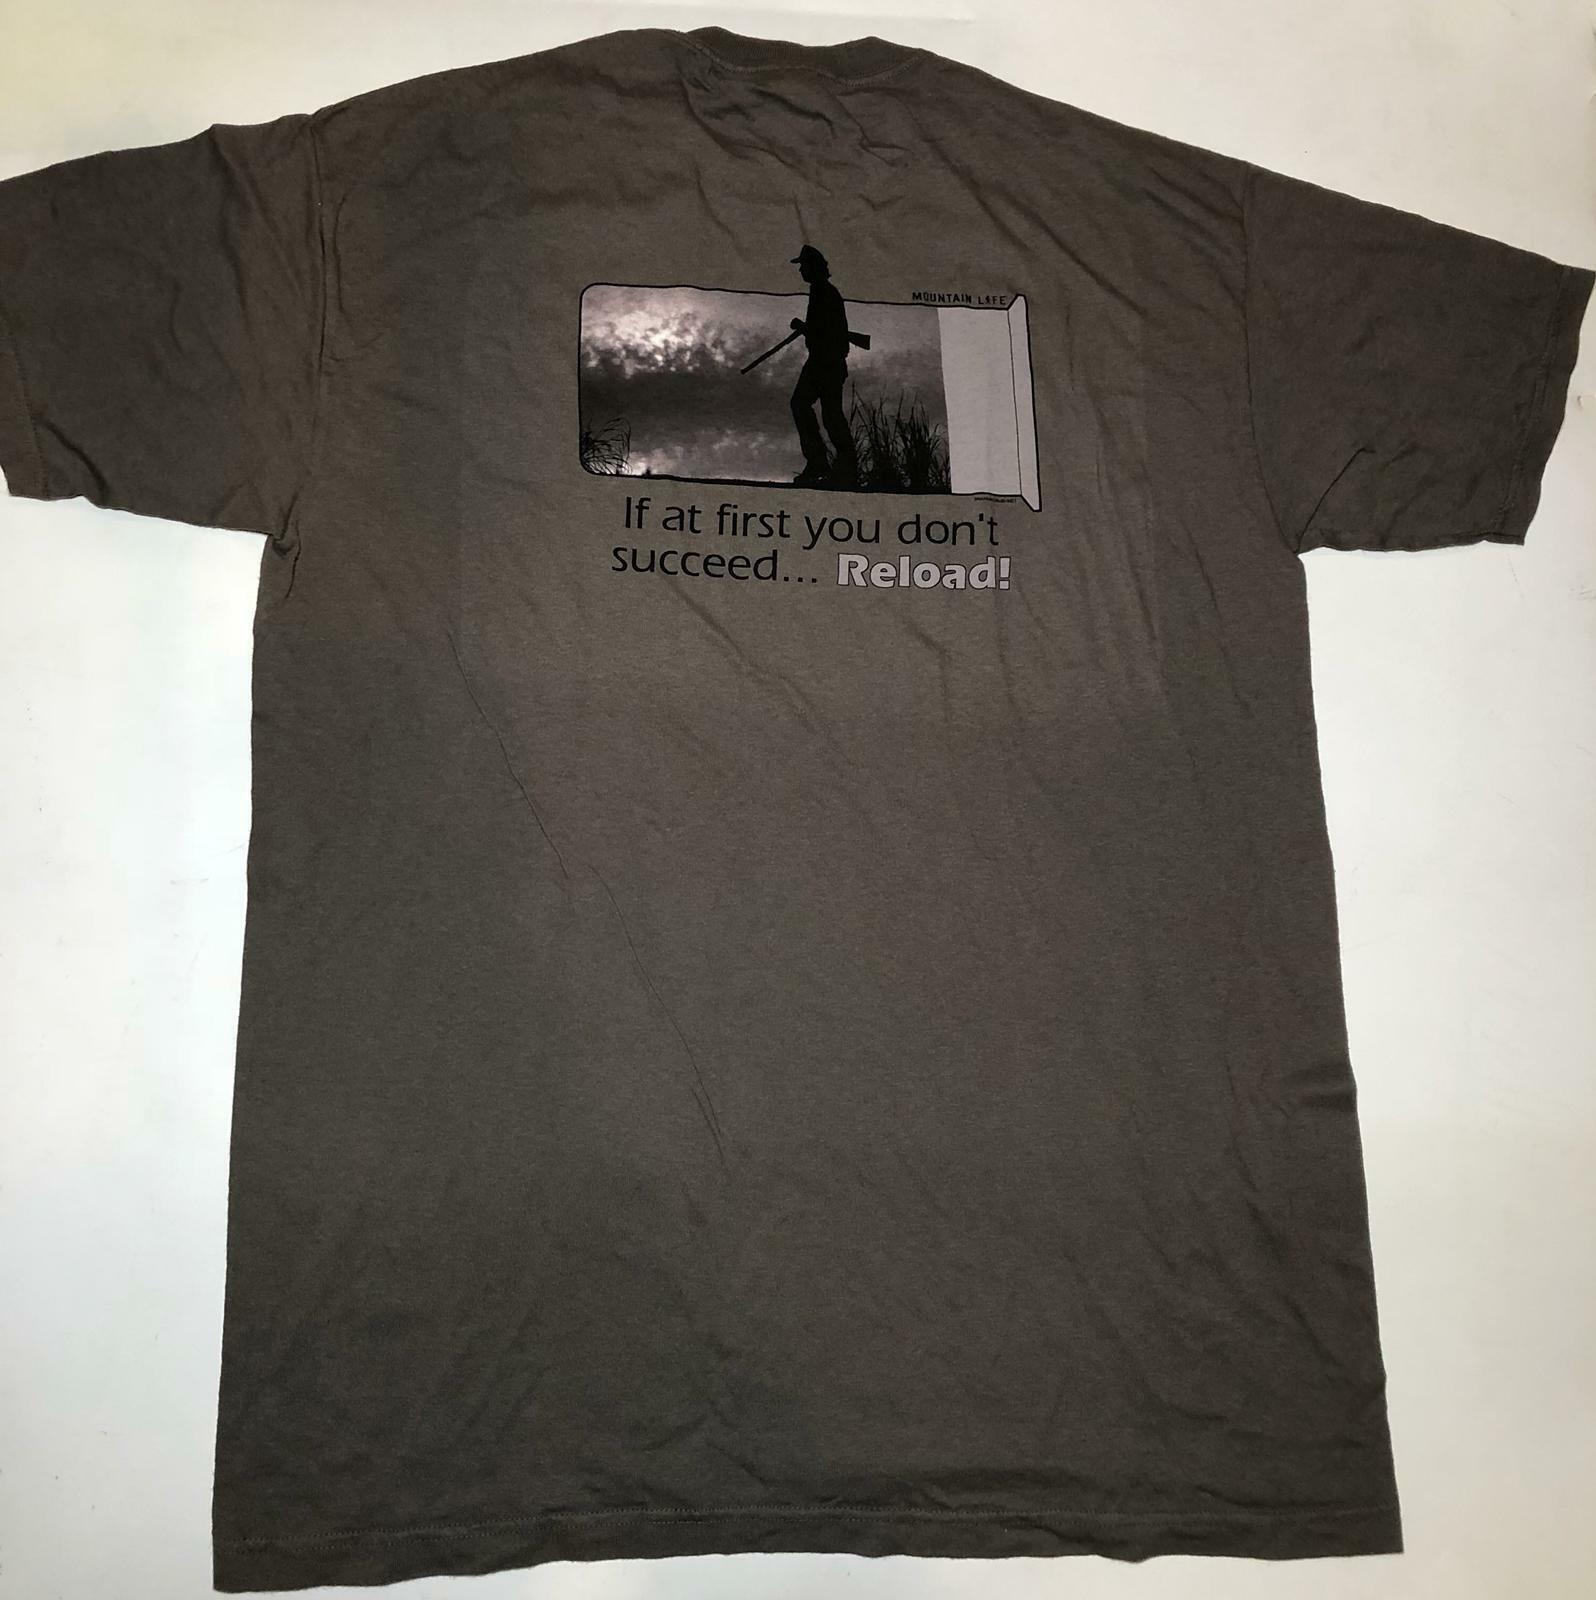 Mountain Life If You Don't Succeed Reload Funny Hunting Grey Shirt Cotton M-3X